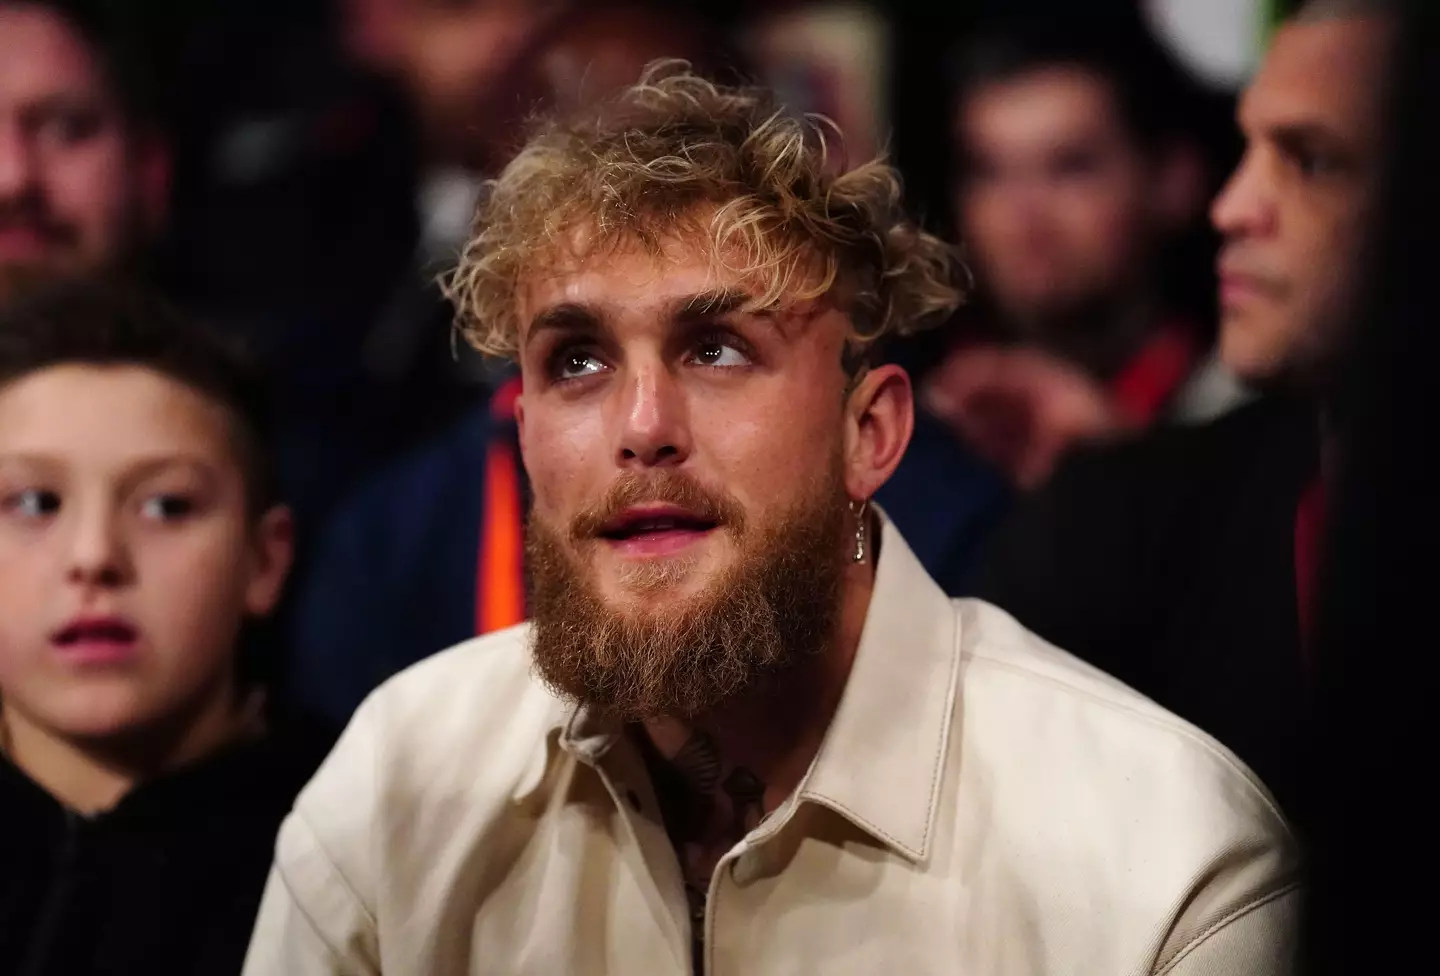 Jake Paul apologised over Bambi in the buildup to the fight.